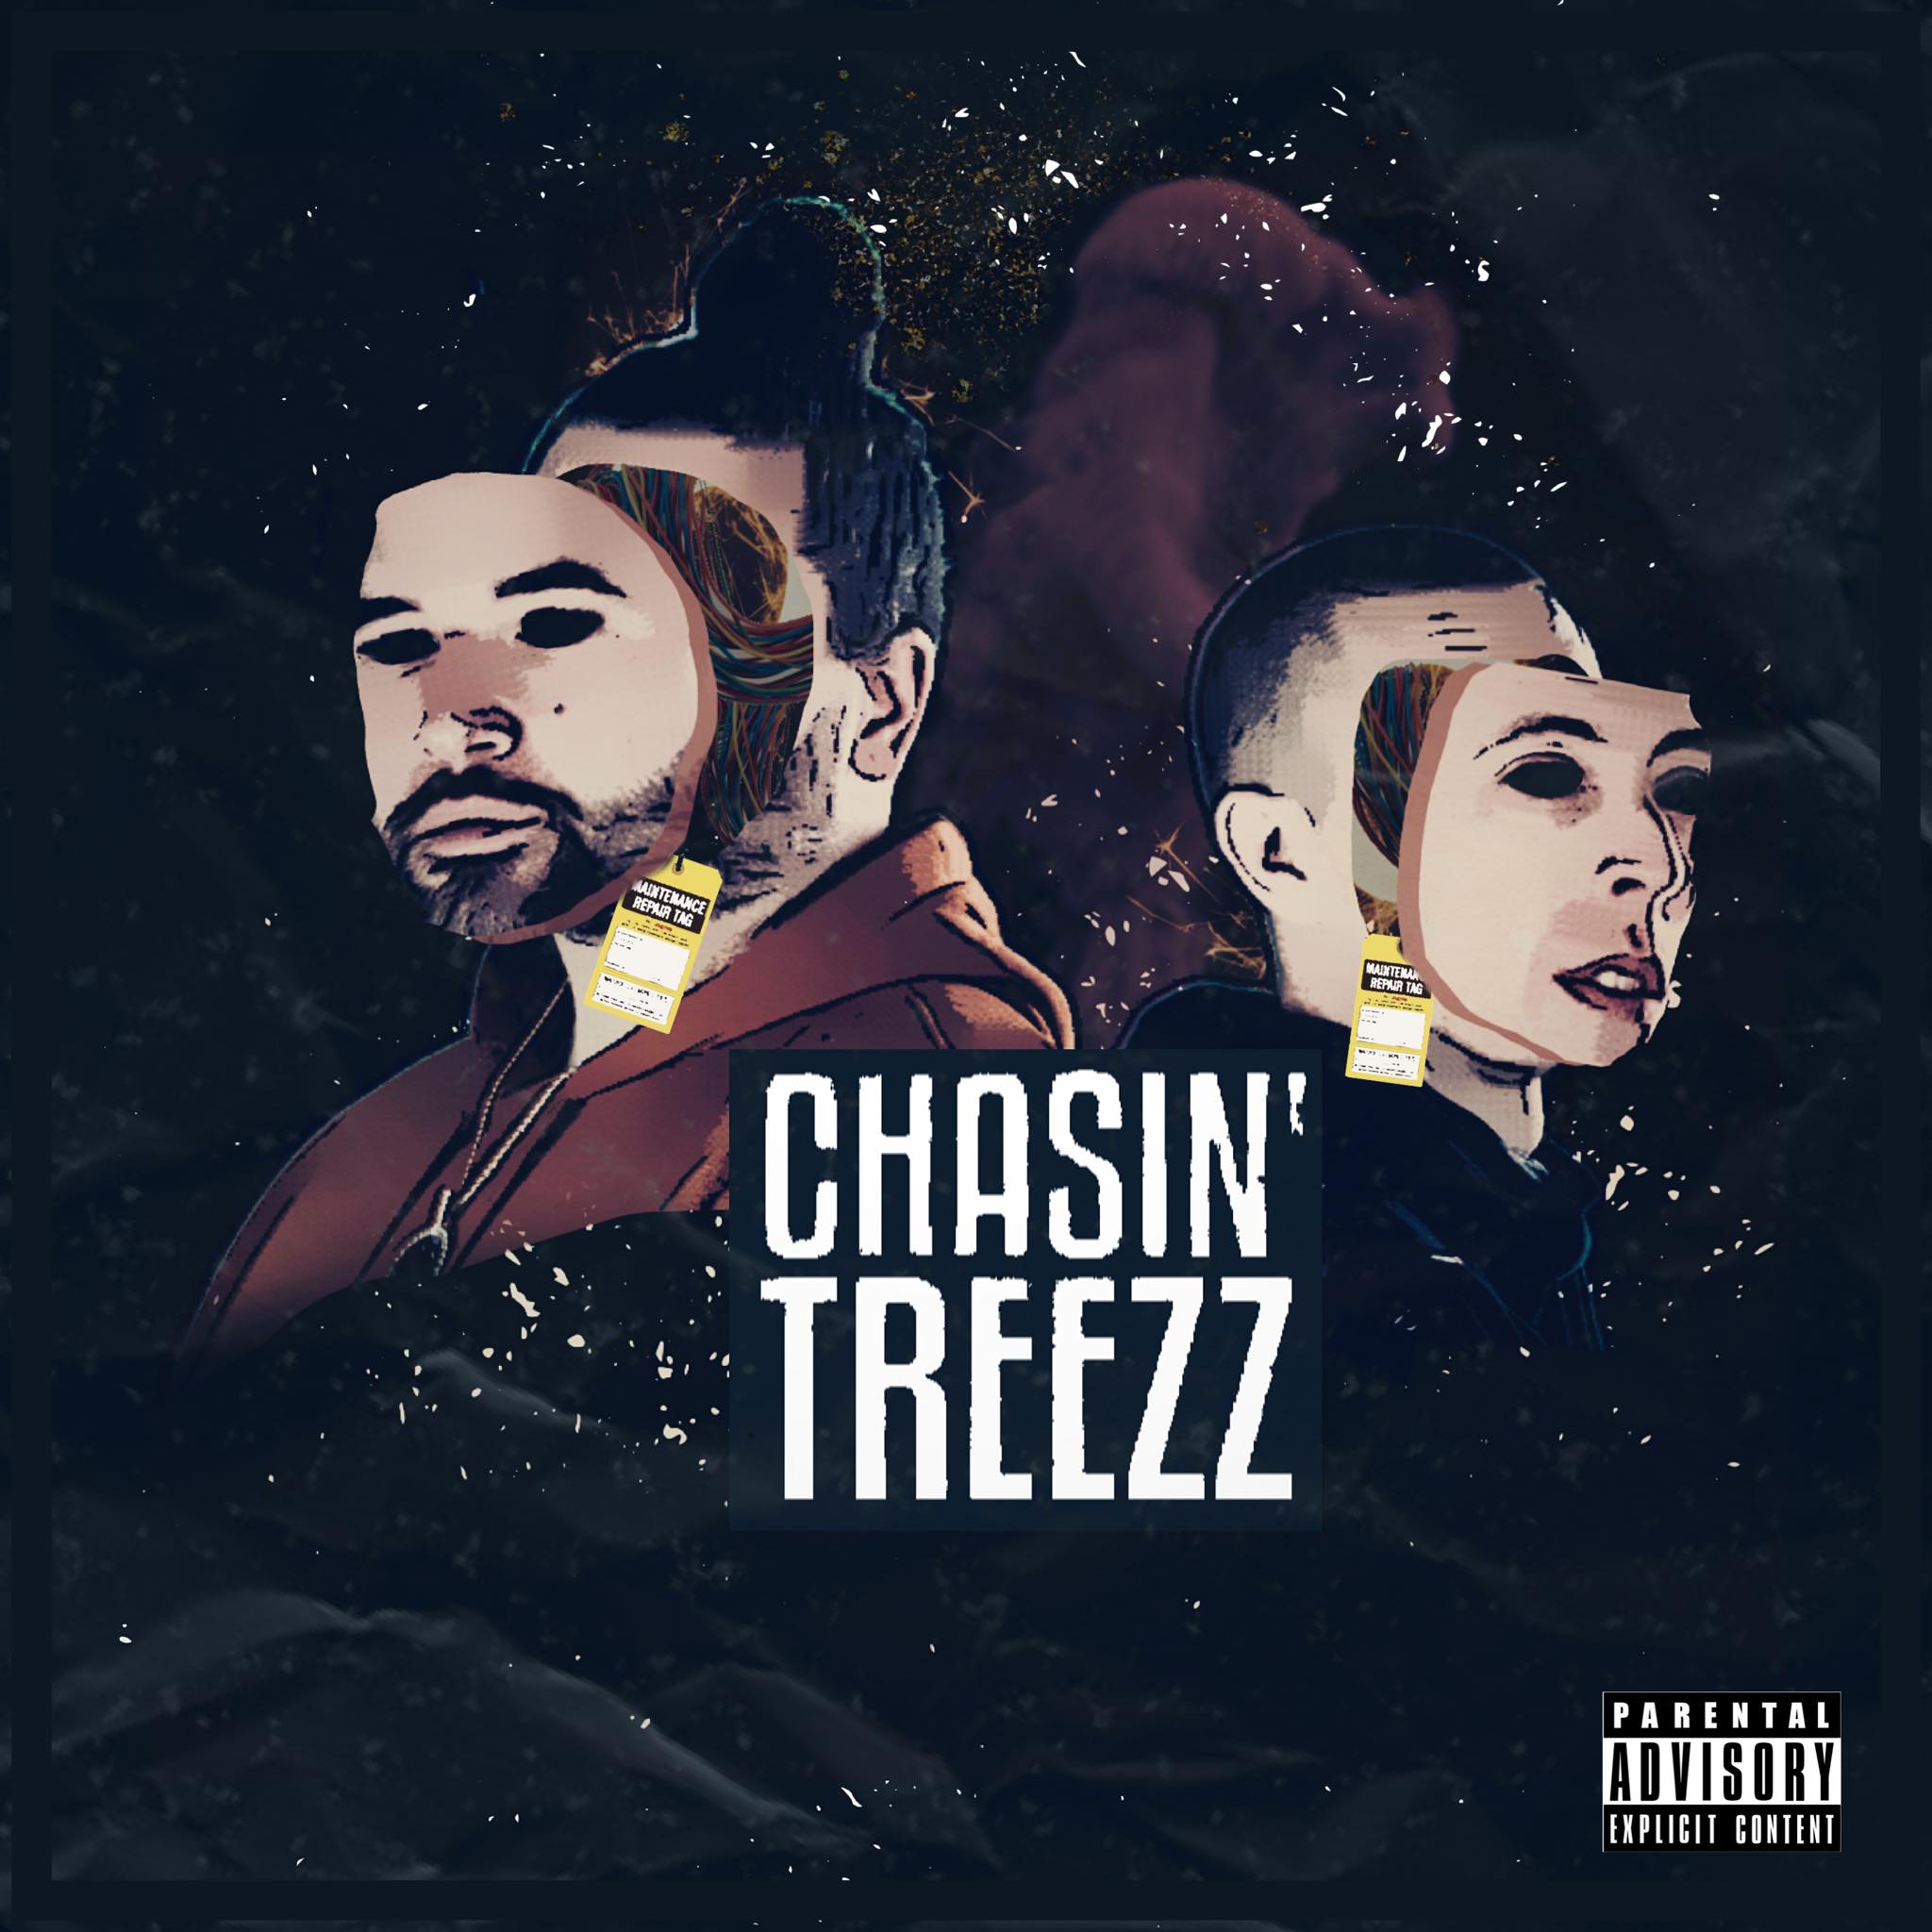 Album art for Chasin' Trees, featuring a black background, and in the foreground, two faces popping out from the heads of two bodies. The eyes on each are missing.